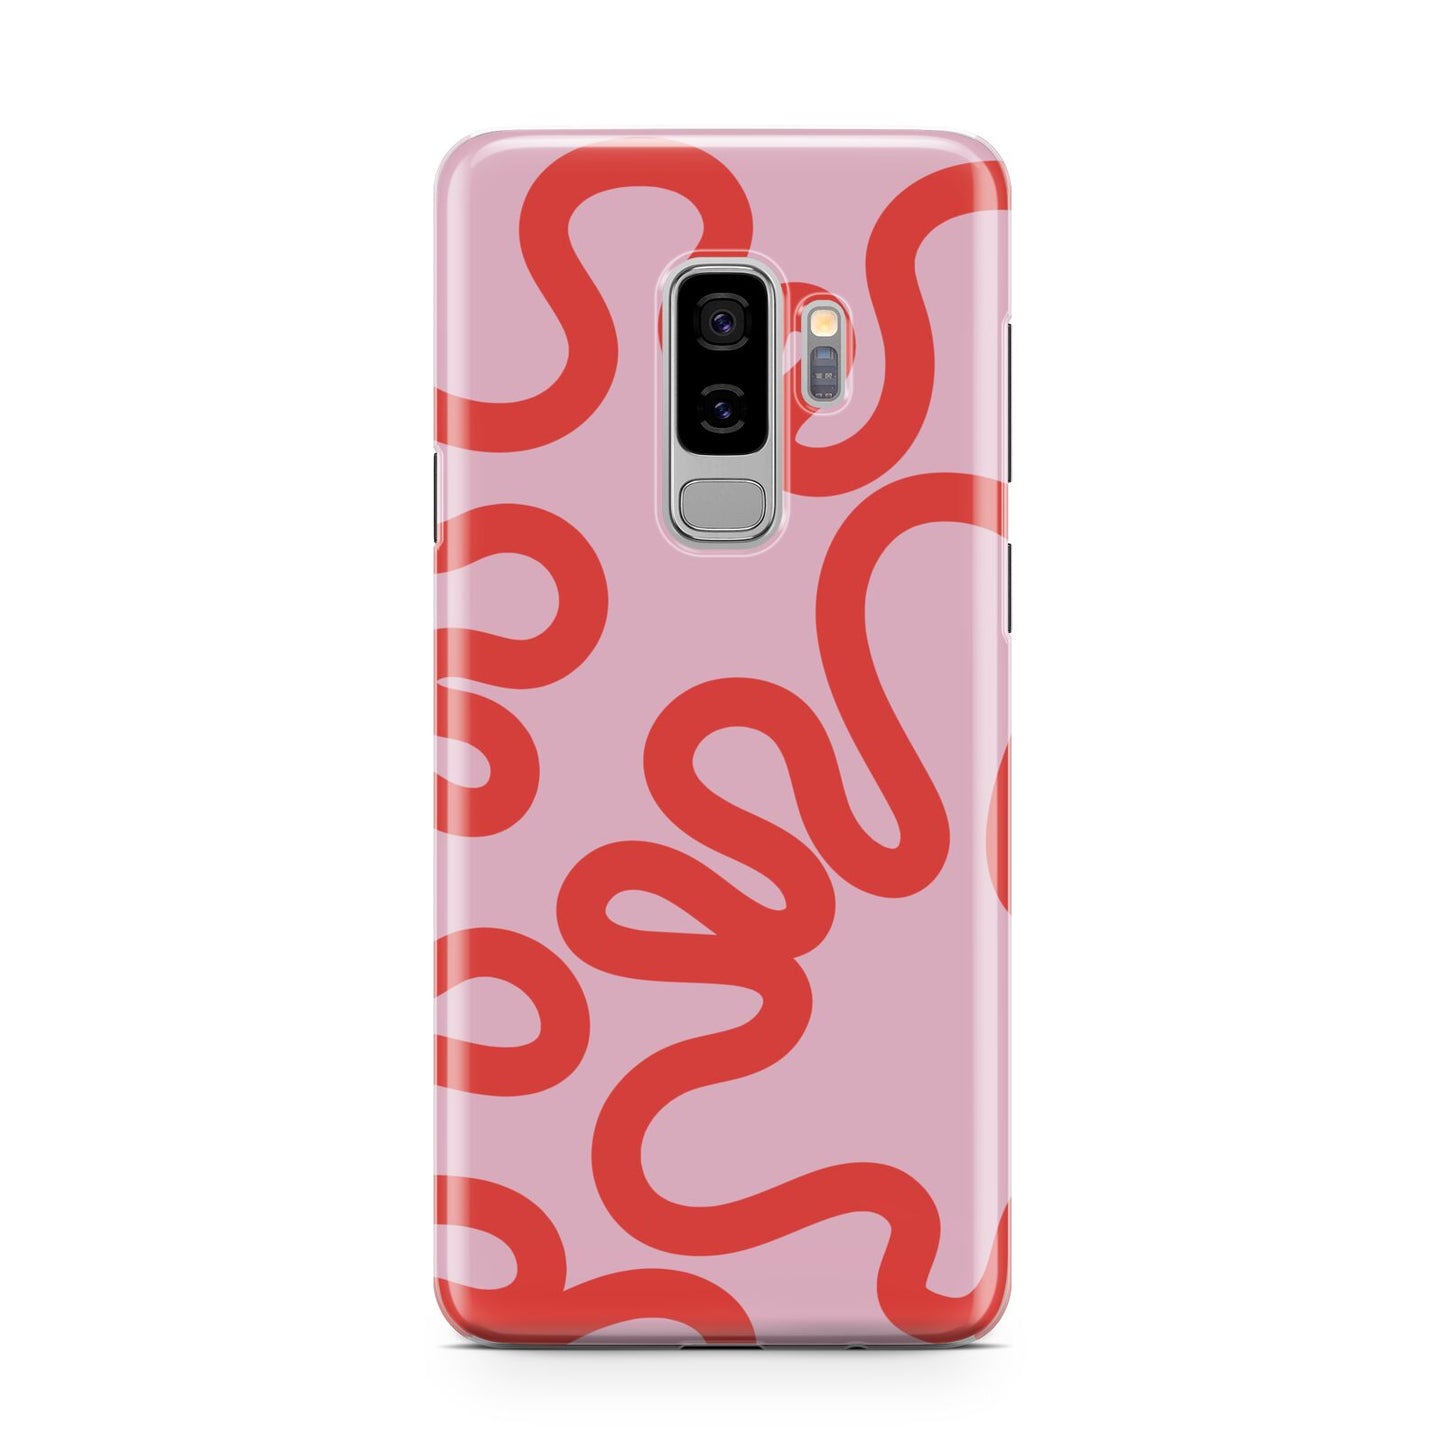 Squiggle Samsung Galaxy S9 Plus Case on Silver phone